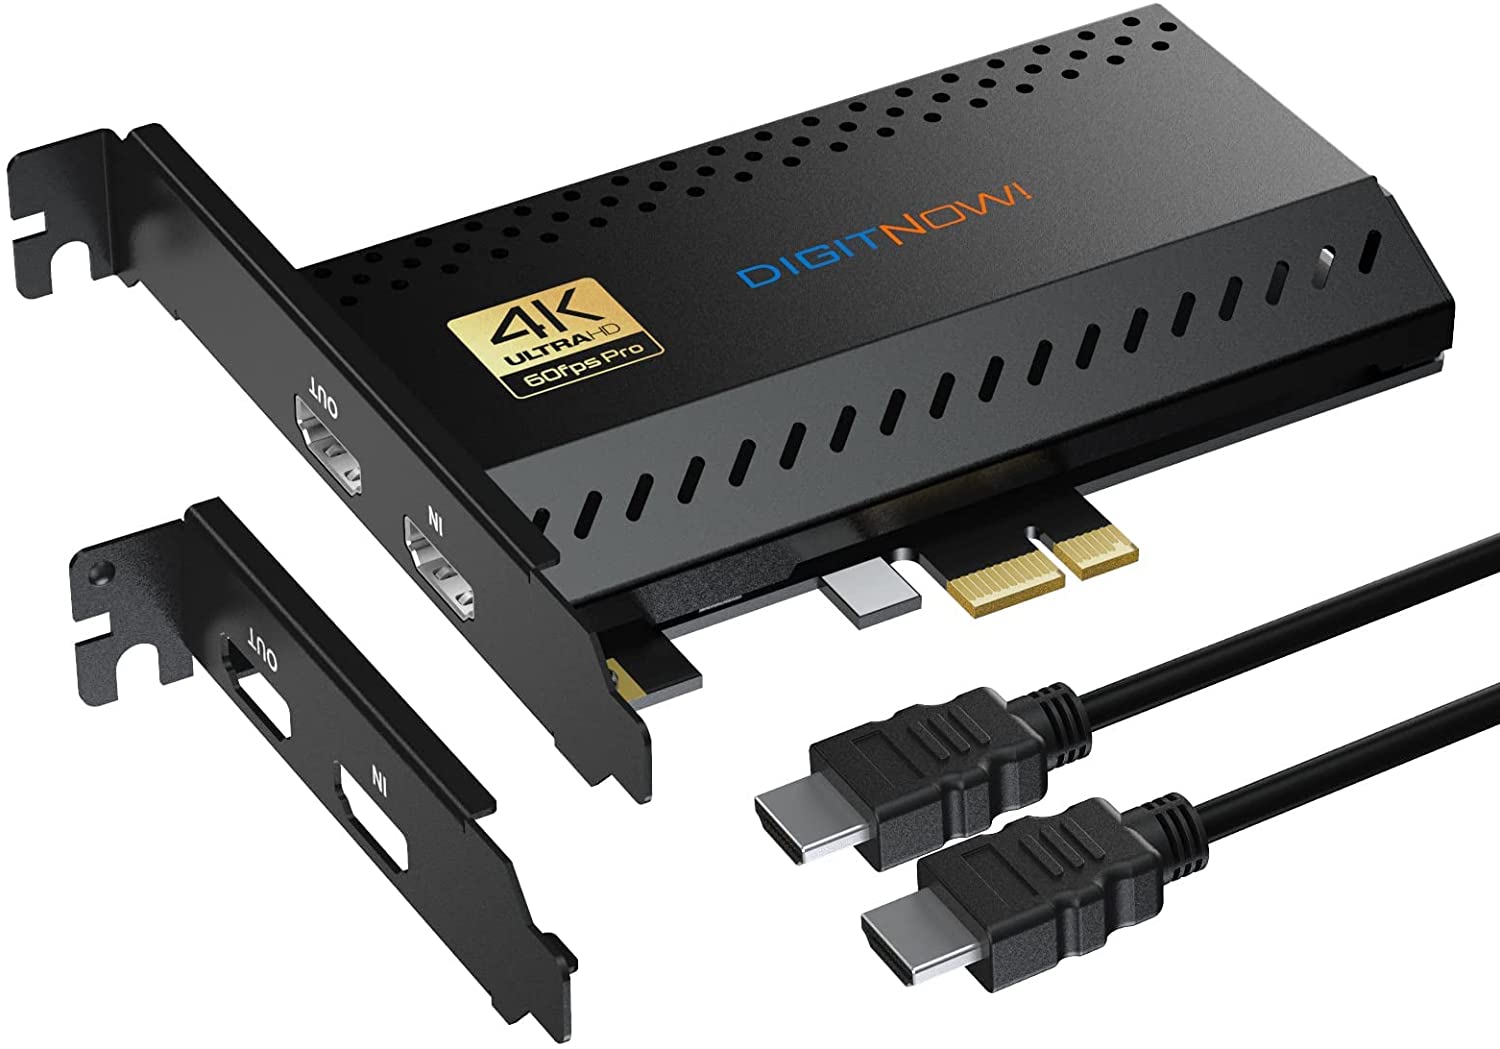 4K60 Pro PCIe Card 4K60 Game Capture, Ultra-Low